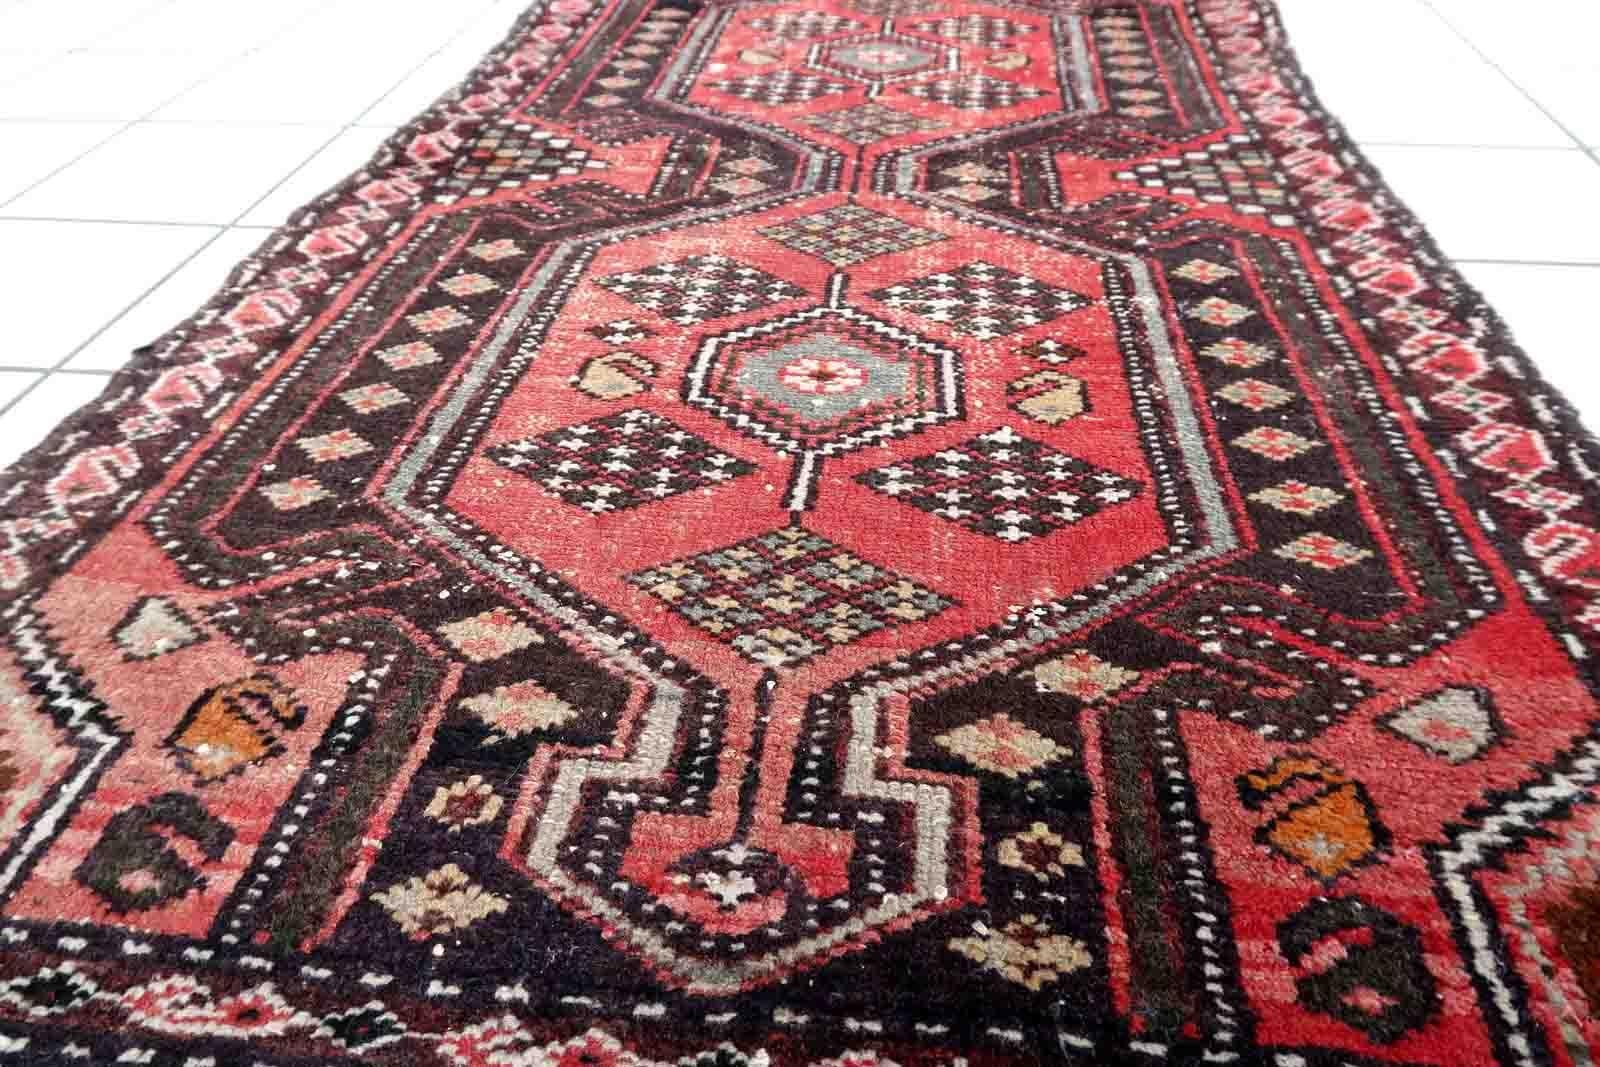 Handmade vintage Persian Hamadan rug in pale red and brown colors. The rug is from the middle of 20th century in original condition, it has some signs of age.

-condition: original, some signs of age,

-circa: 1950s,

-size: 2.5' x 4.2' (78cm